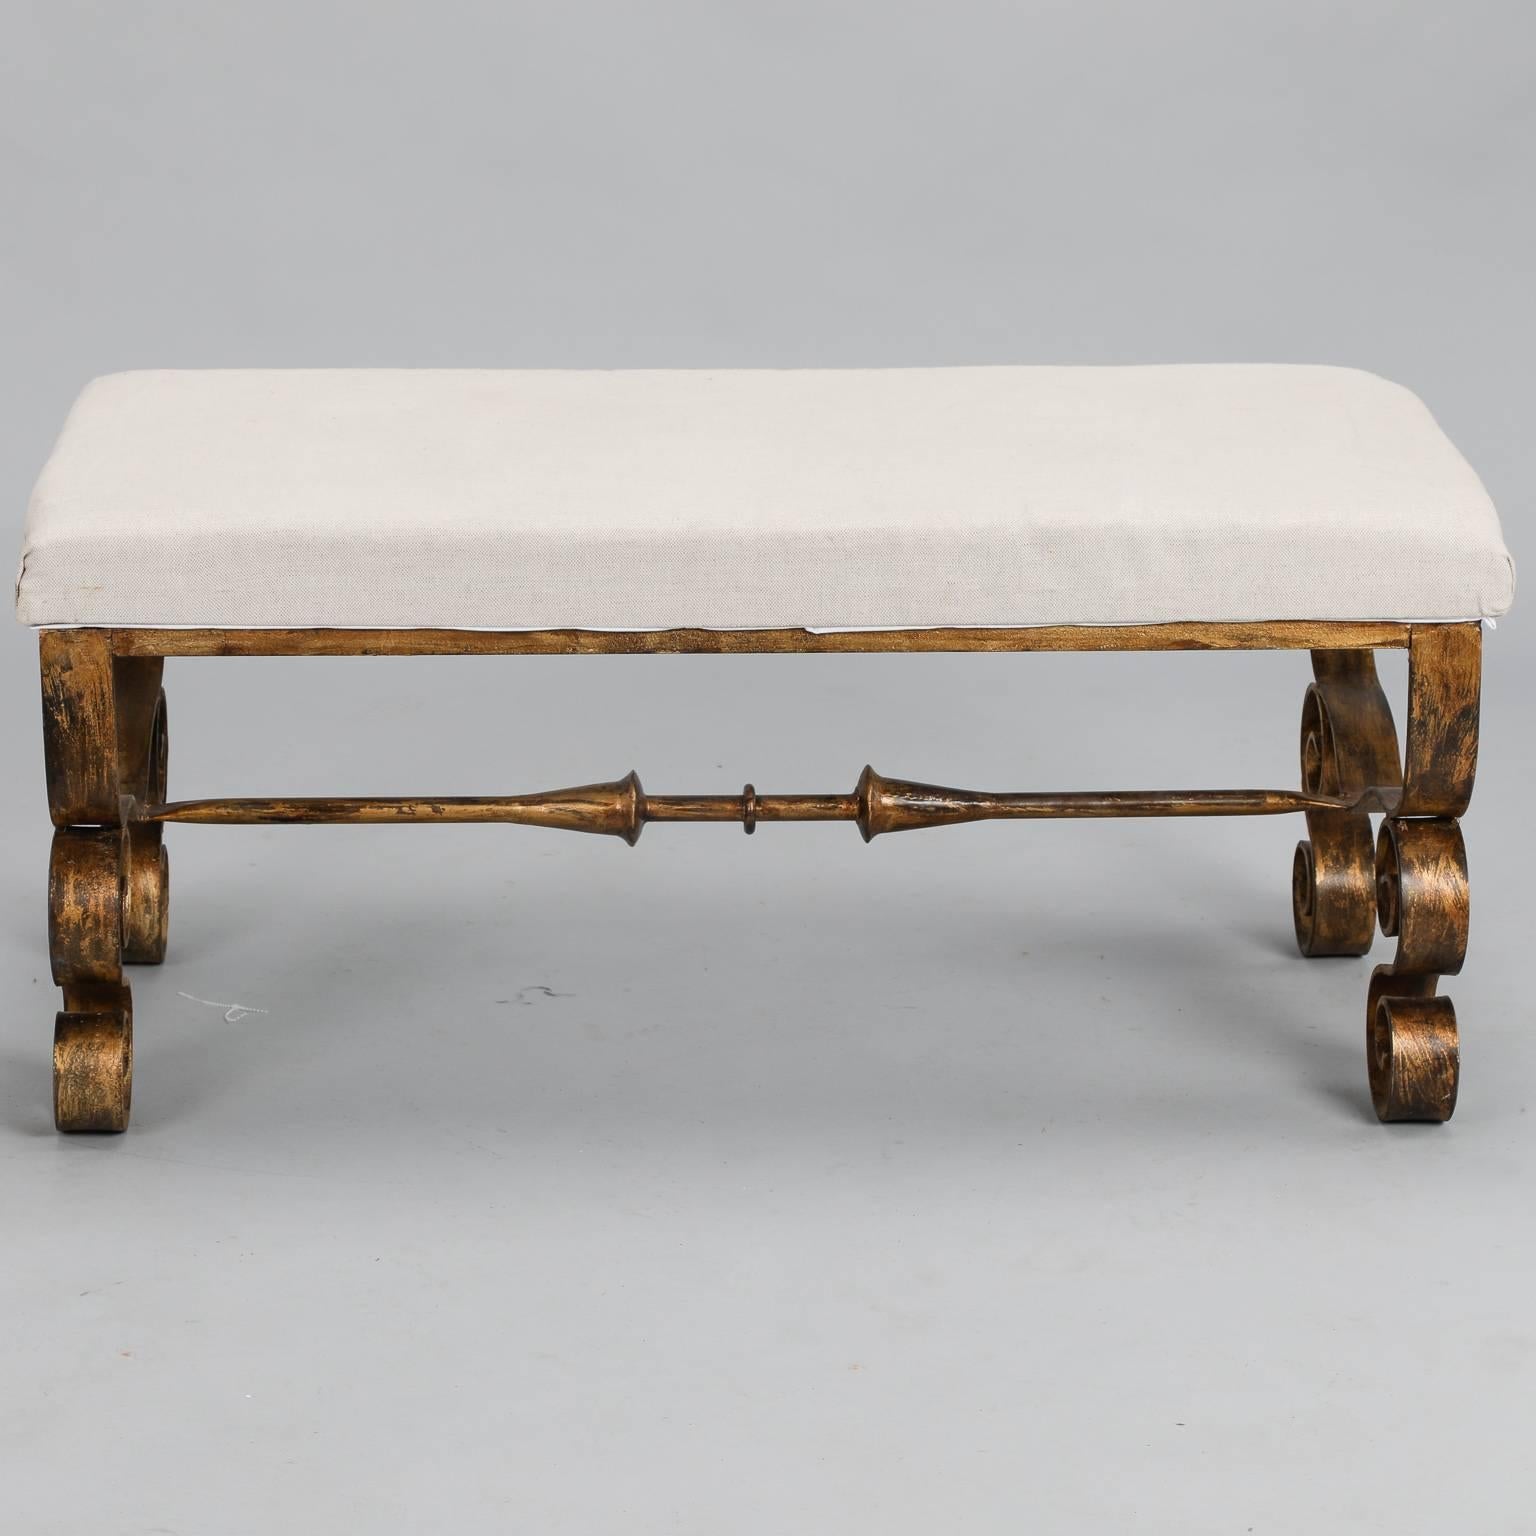 Spanish Upholstered Bench with Scrolled Gilt Metal Legs